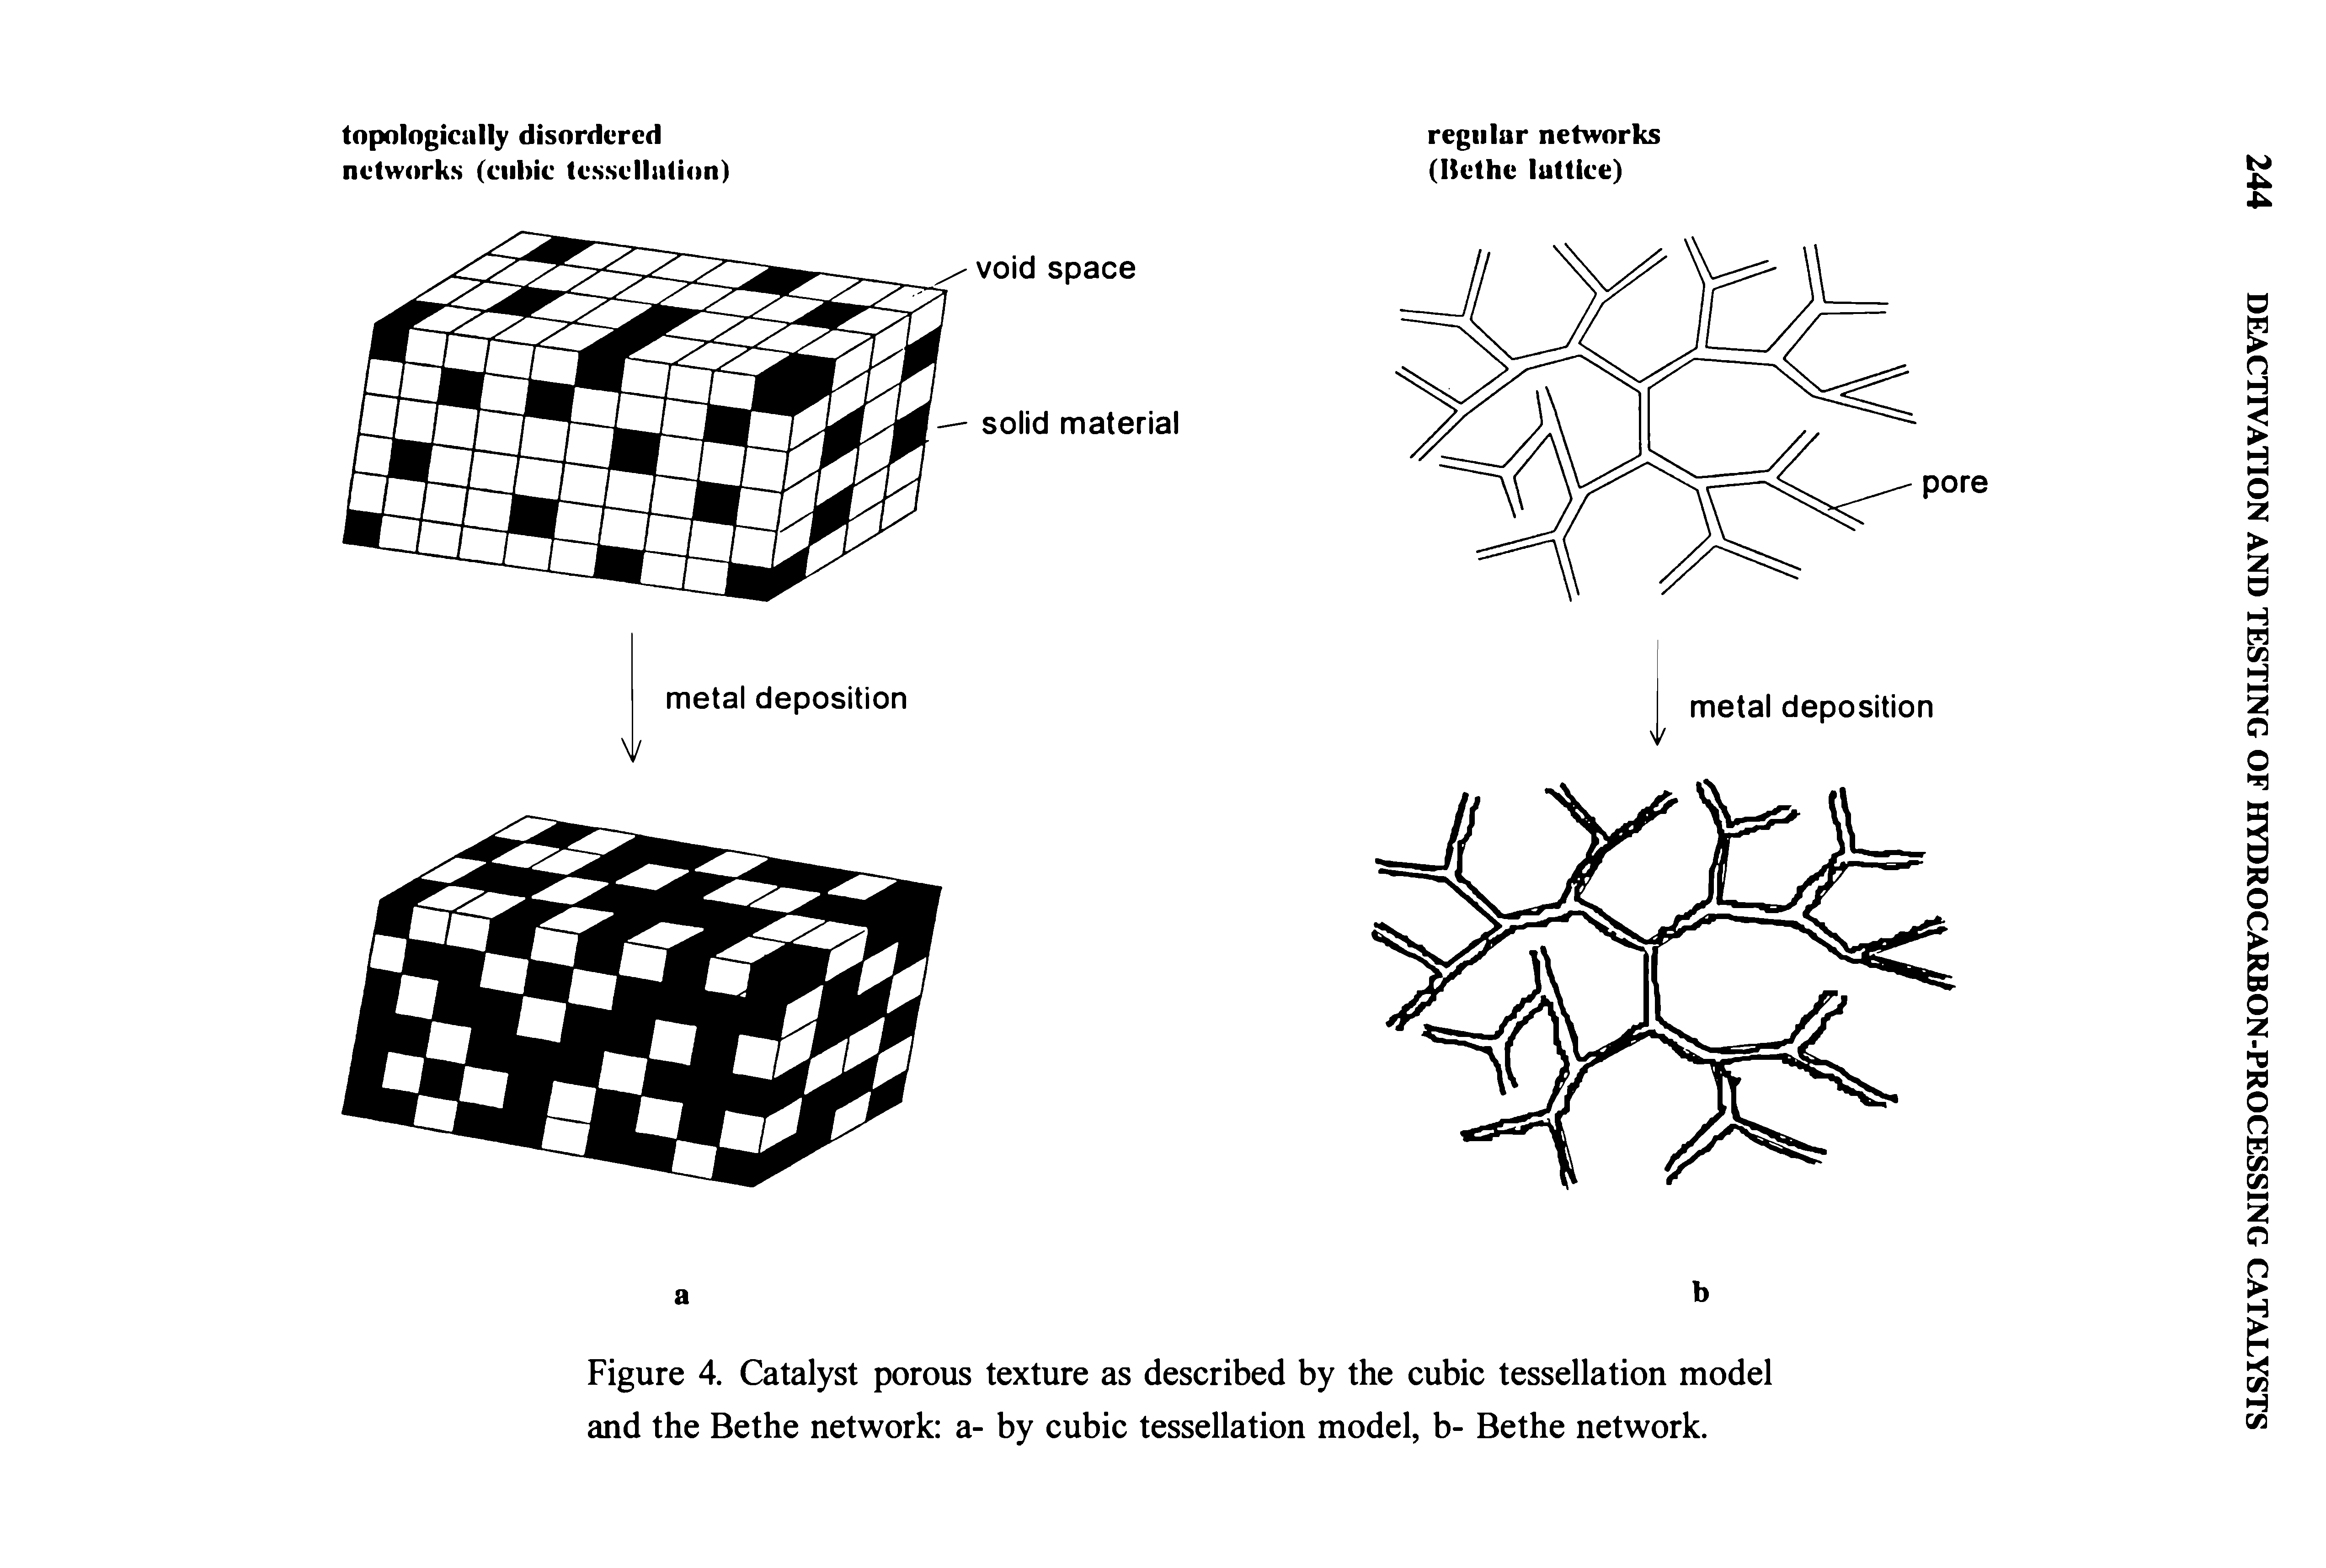 Figure 4. Catalyst porous texture as described by the cubic tessellation model and the Bethe network a- by cubic tessellation model, b- Bethe network.